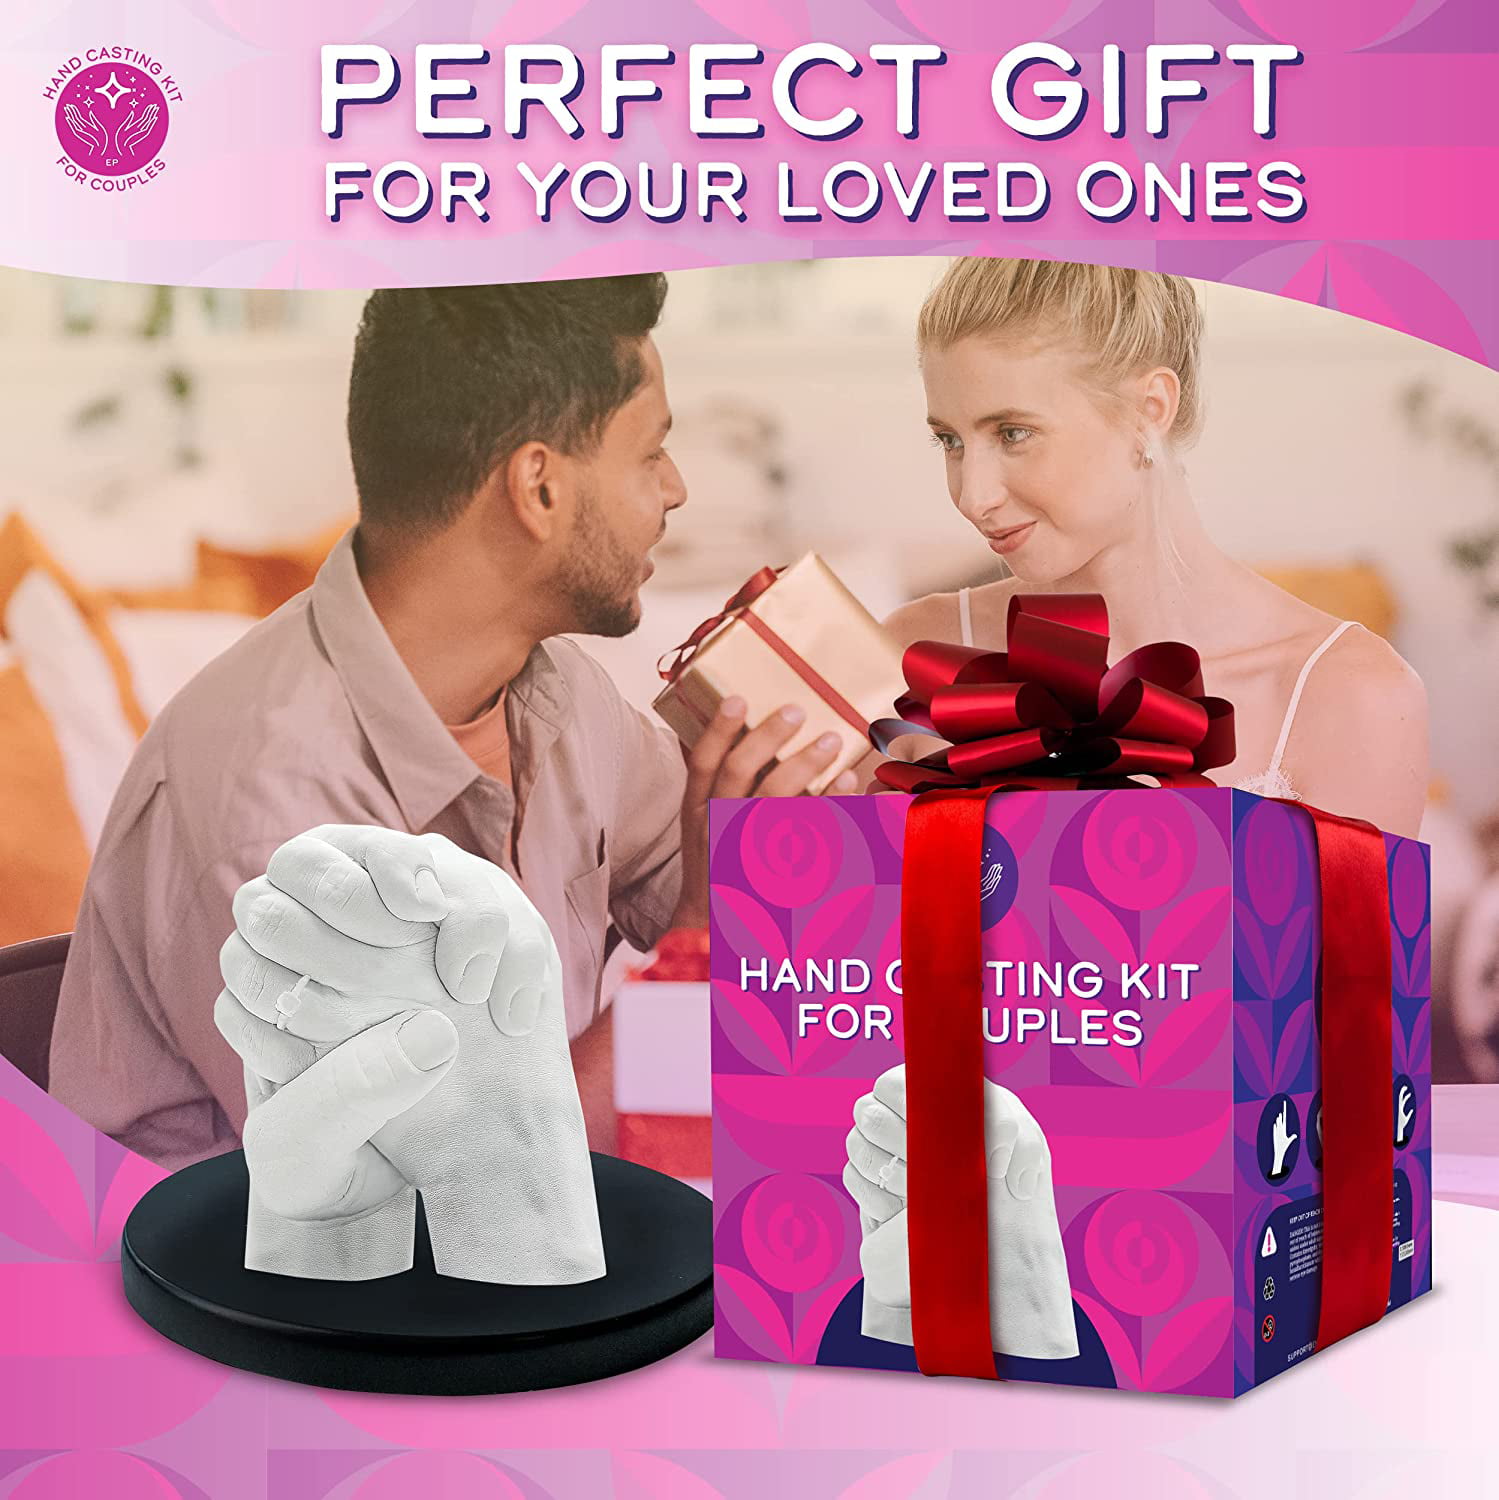 Dylan & Rylie Hand Casting Kit for Couples - Plaster Hand Mold Casting DIY Kit for Adults and Kids Anniversary Wedding Birthday Gifts for Her or Him